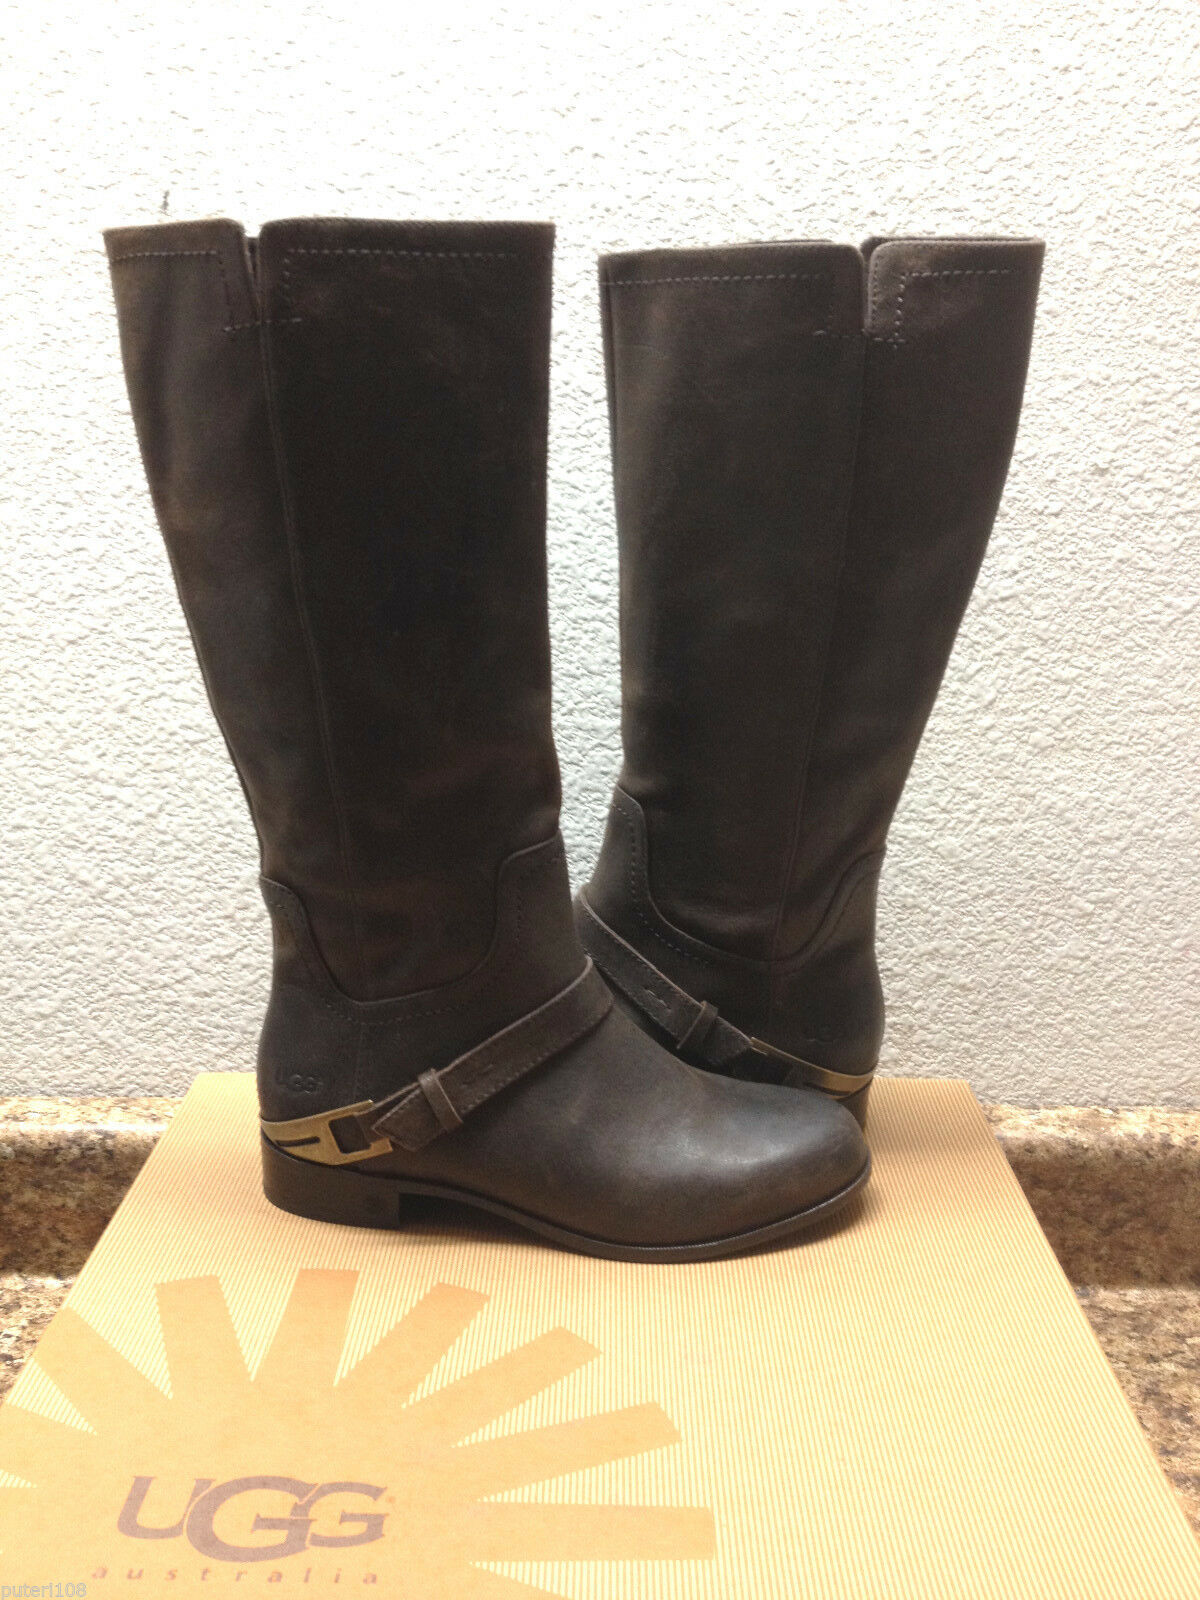 ugg channing riding boots